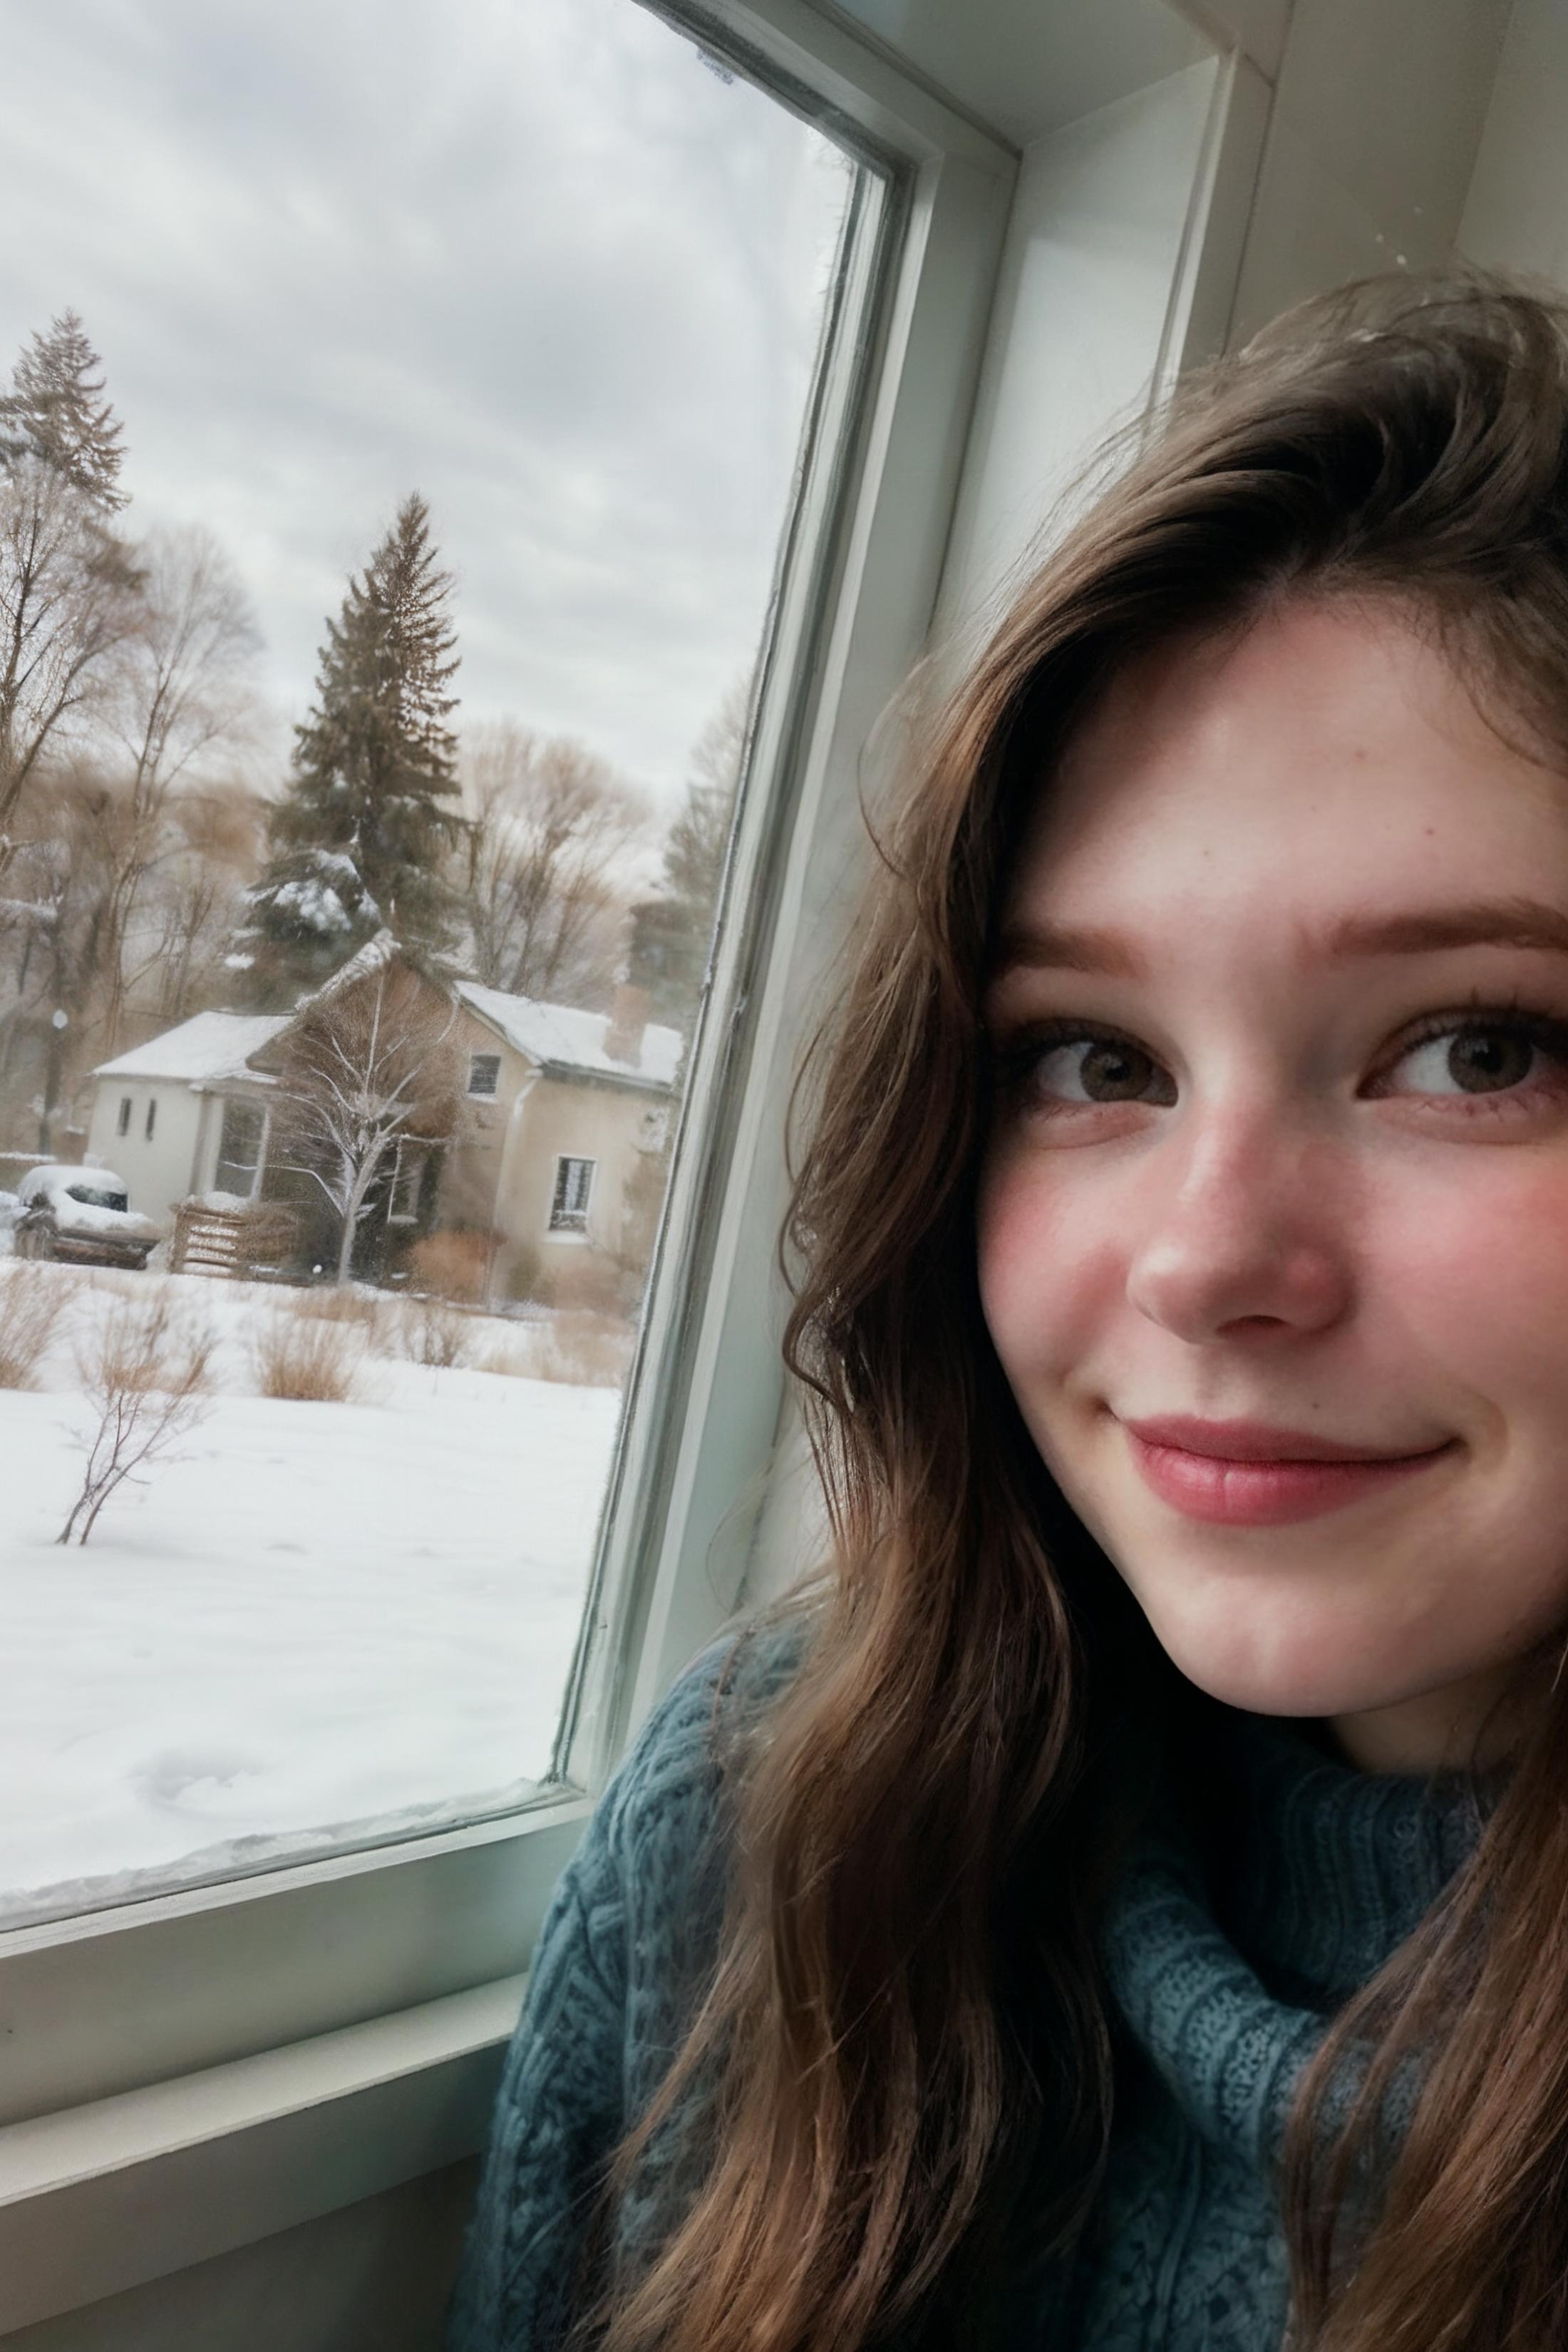 A young woman with brown hair looking out a window in winter.